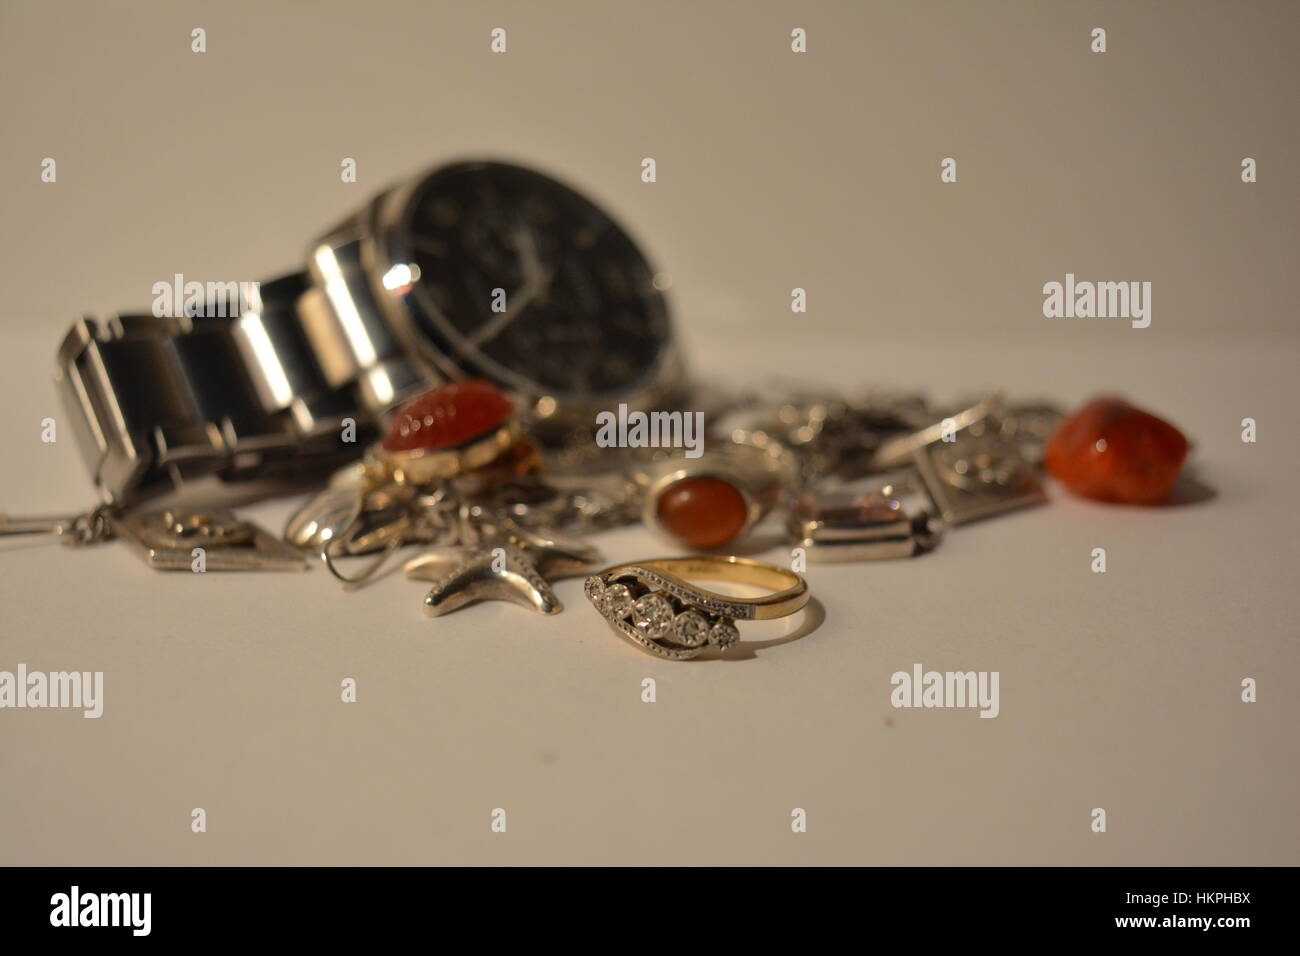 Part of a greater collection of jewellery Stock Photo